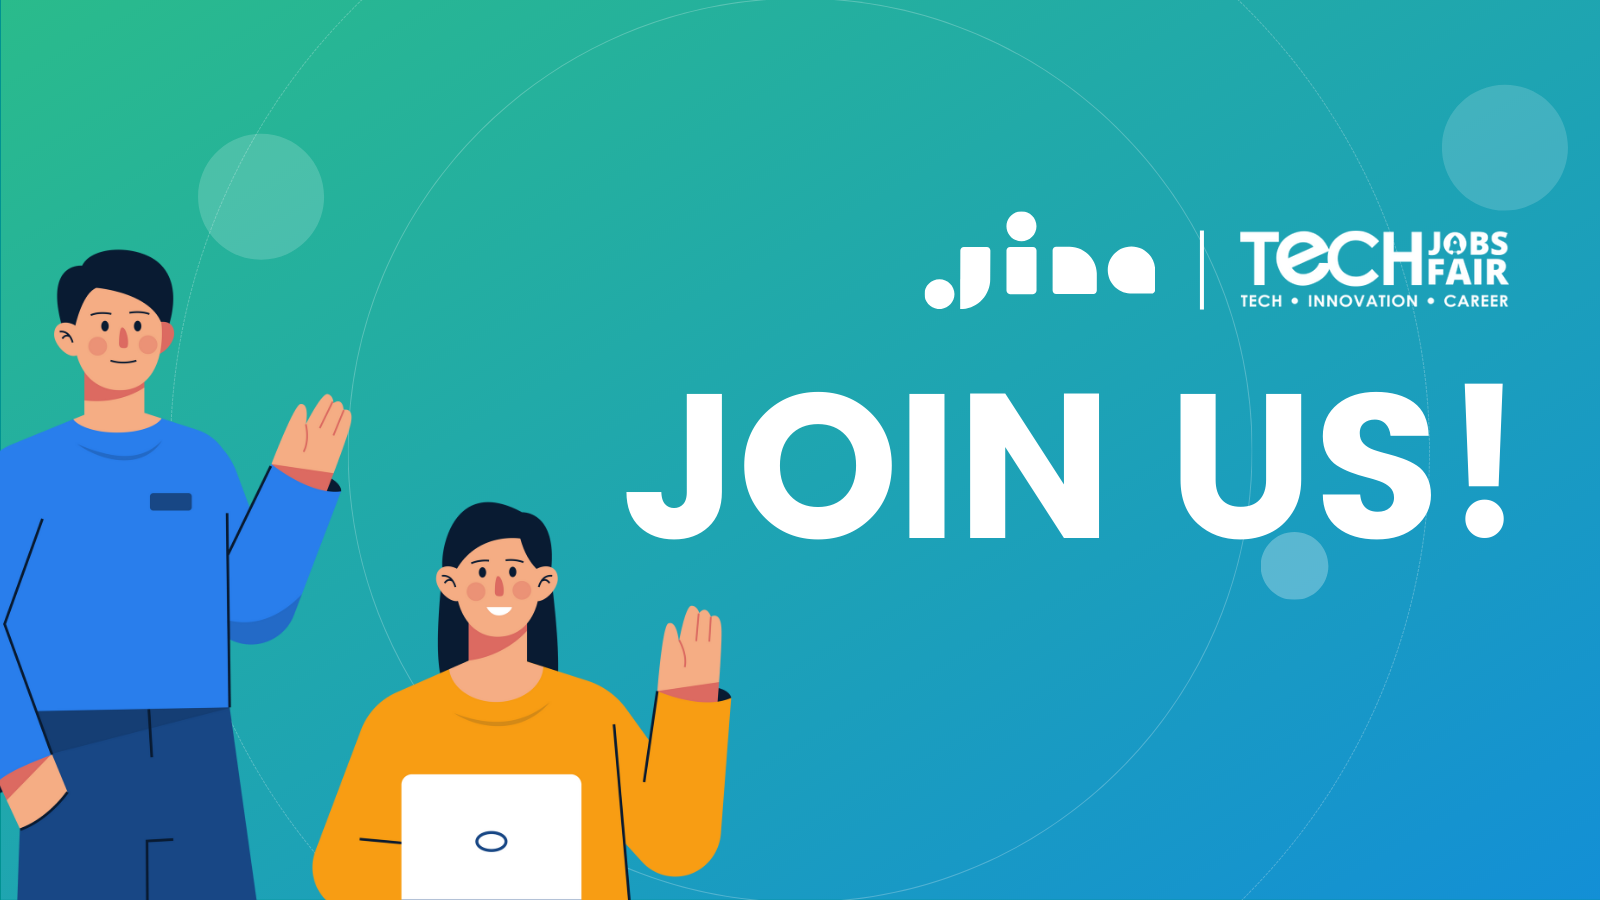 Promotional banner featuring 'JOIN US!' text for a tech jobs fair, with a man waving and a woman holding a laptop